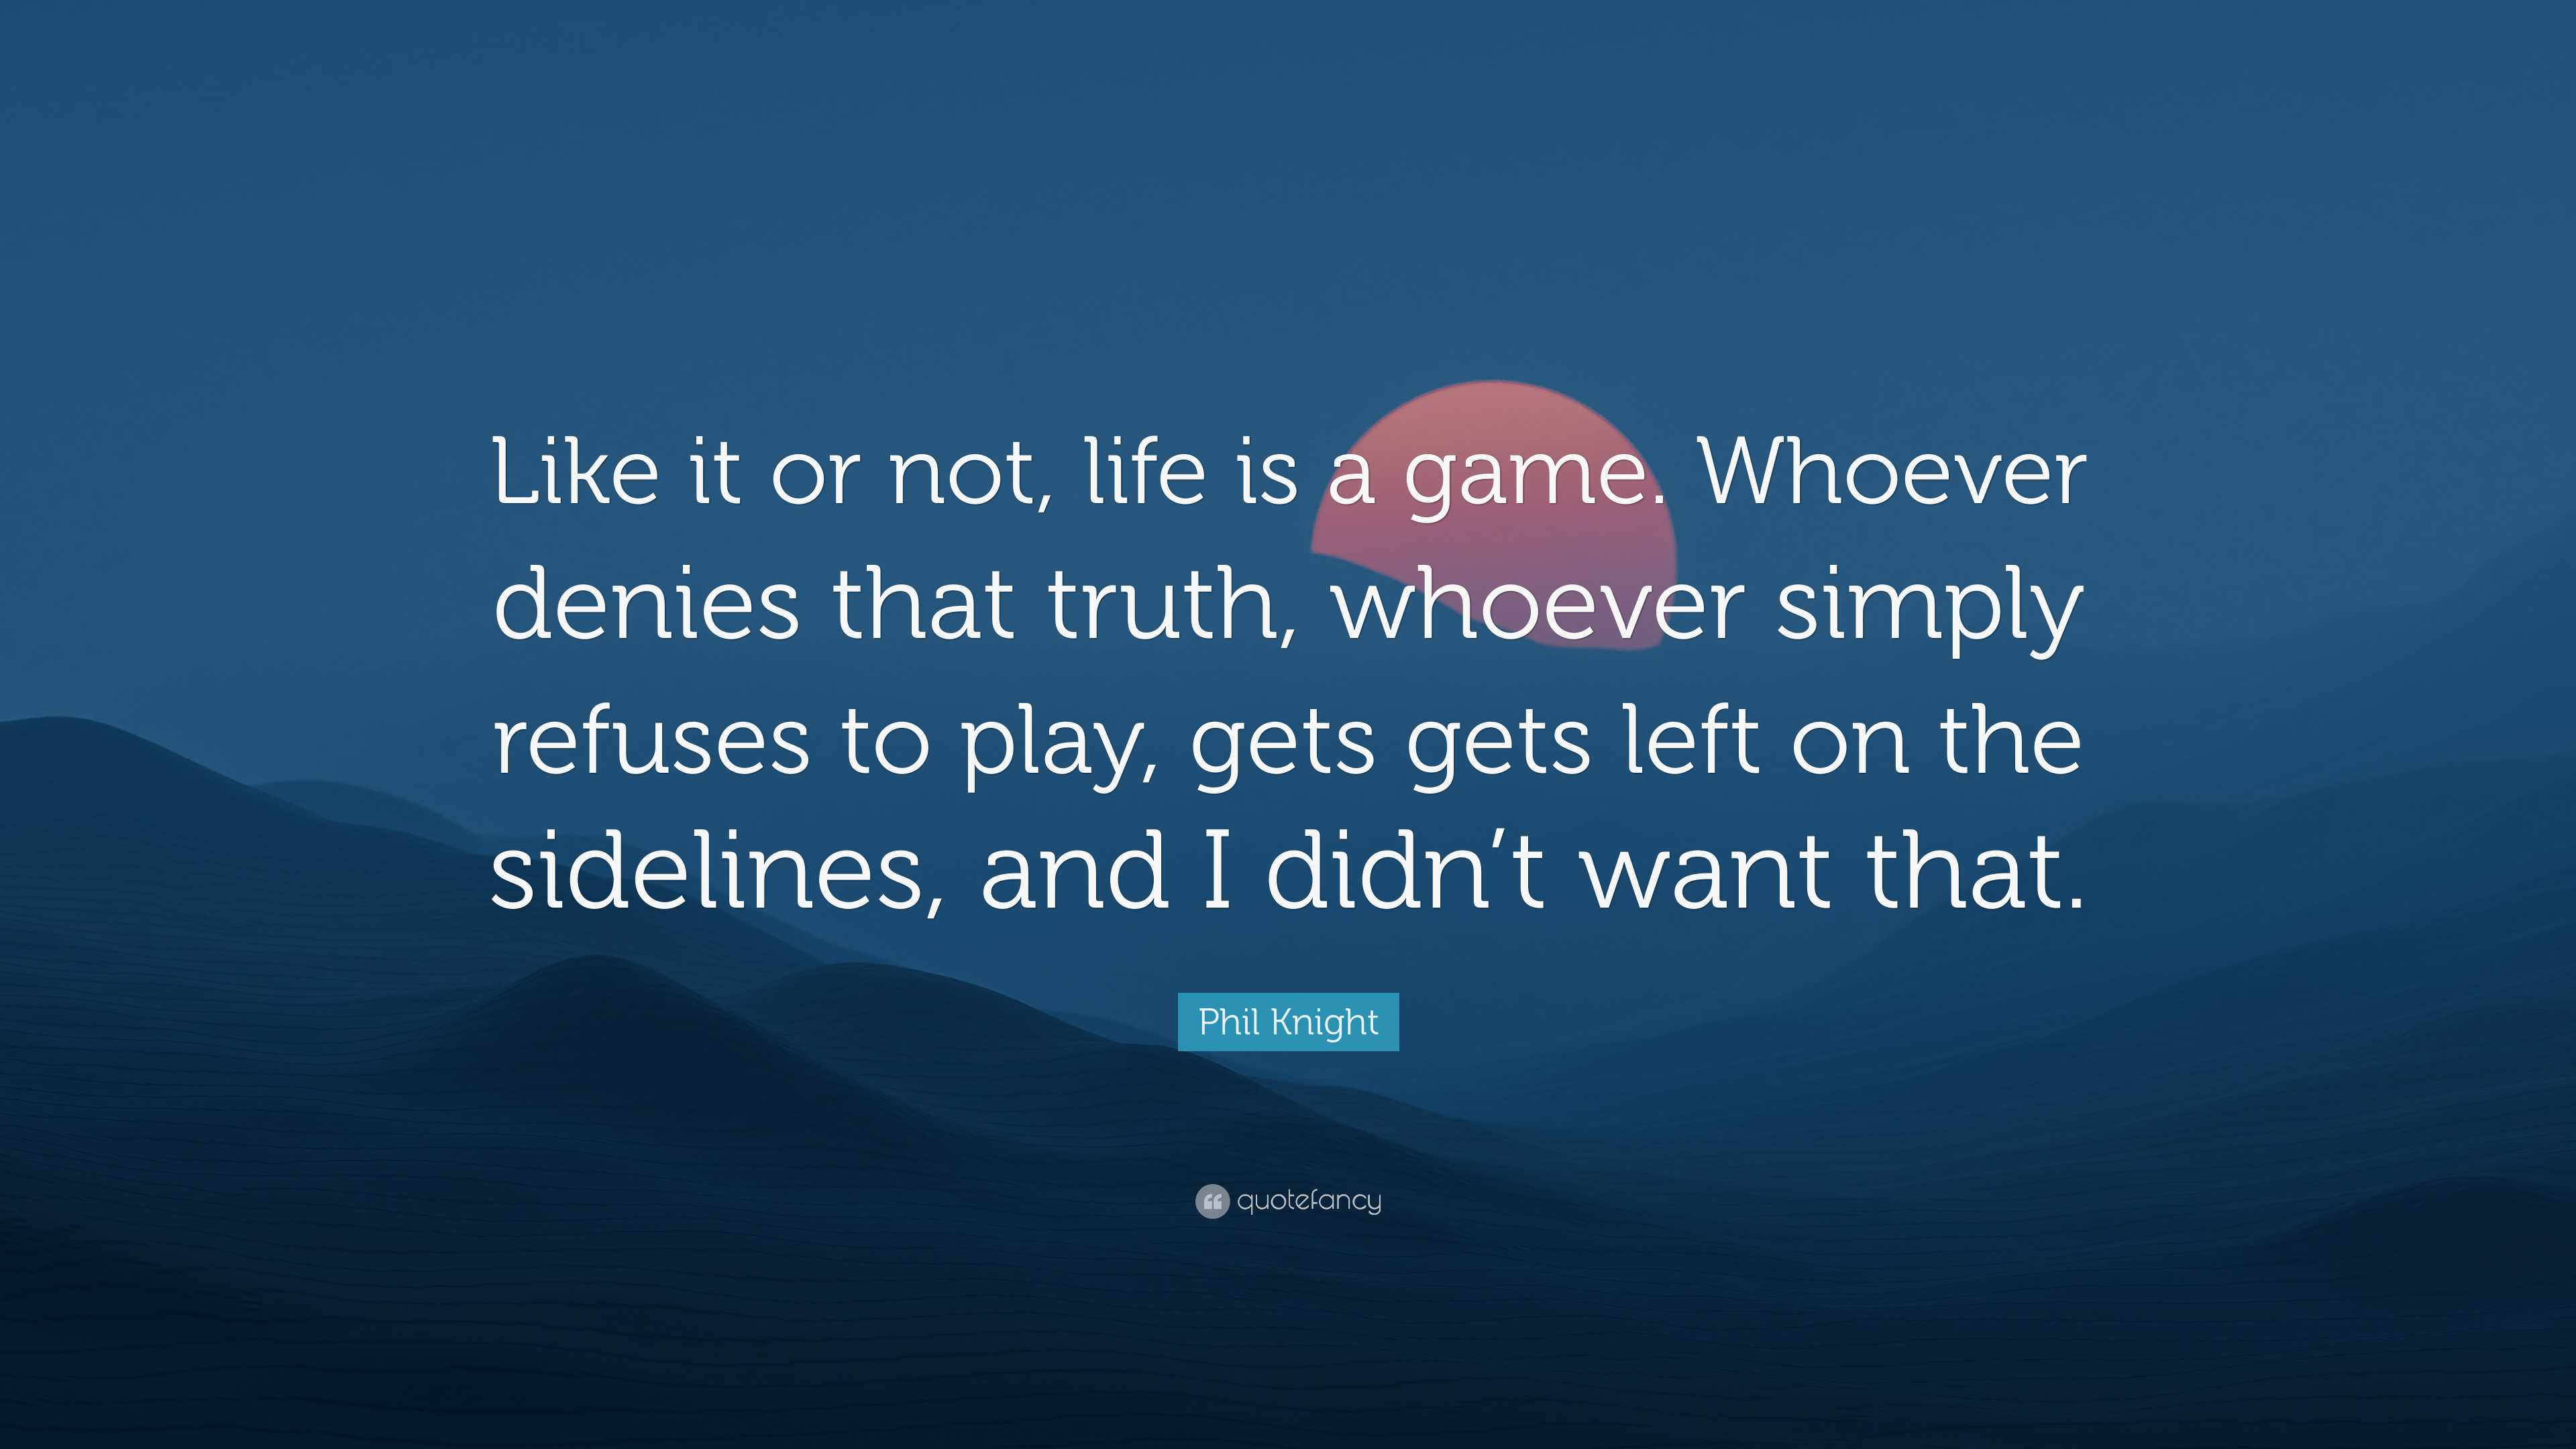 Phil Knight Quote: “Like it or not, life is a game.”